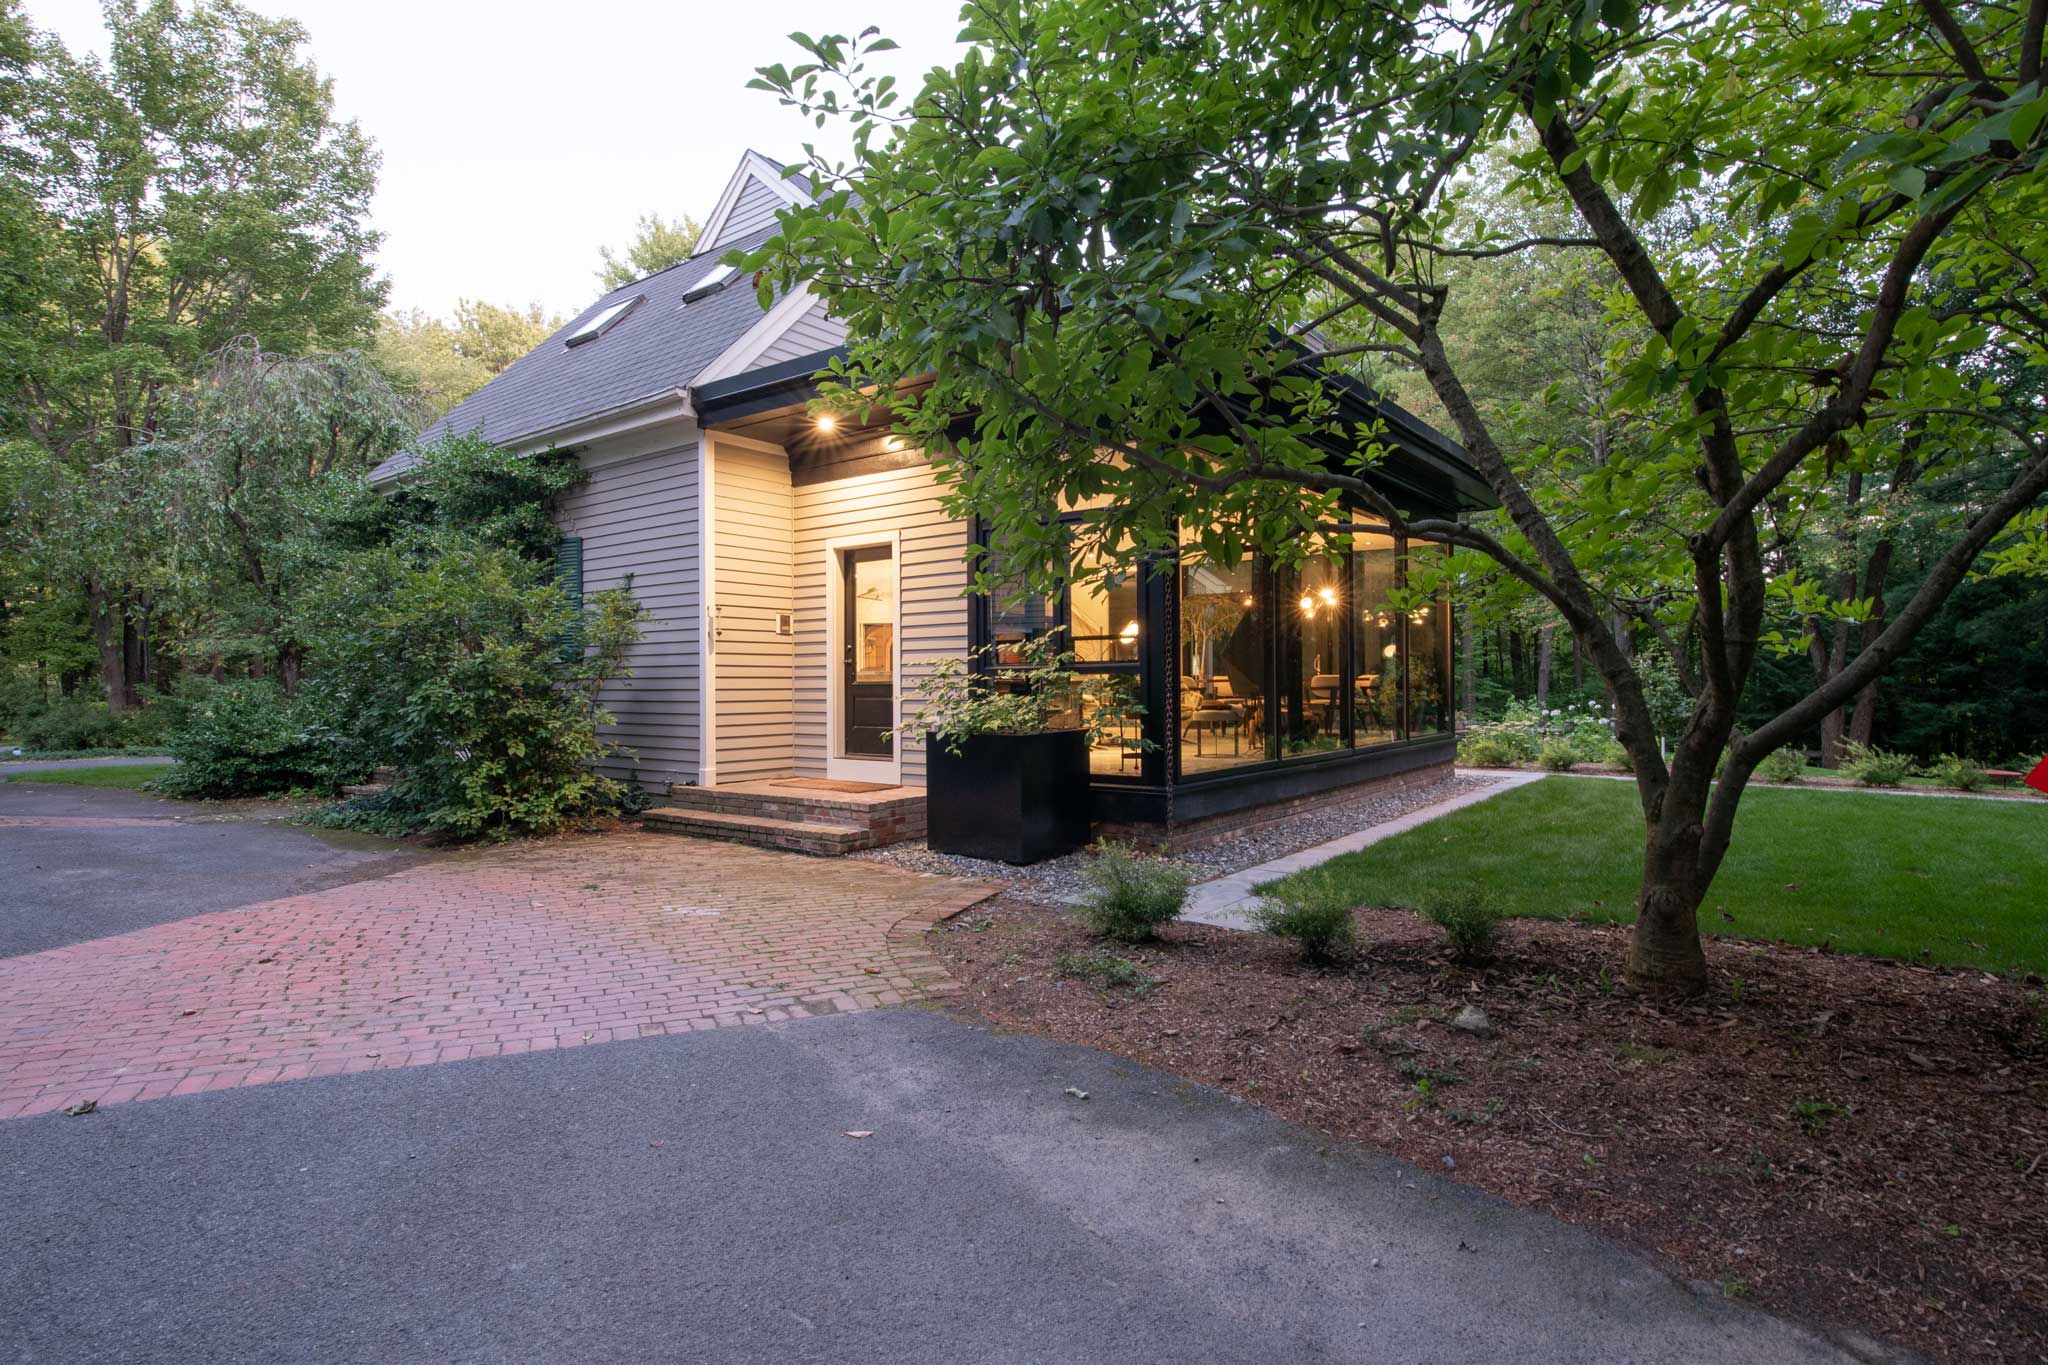 Exterior view of Outside In House from the driveway showing landscaping blending into the design of the home.